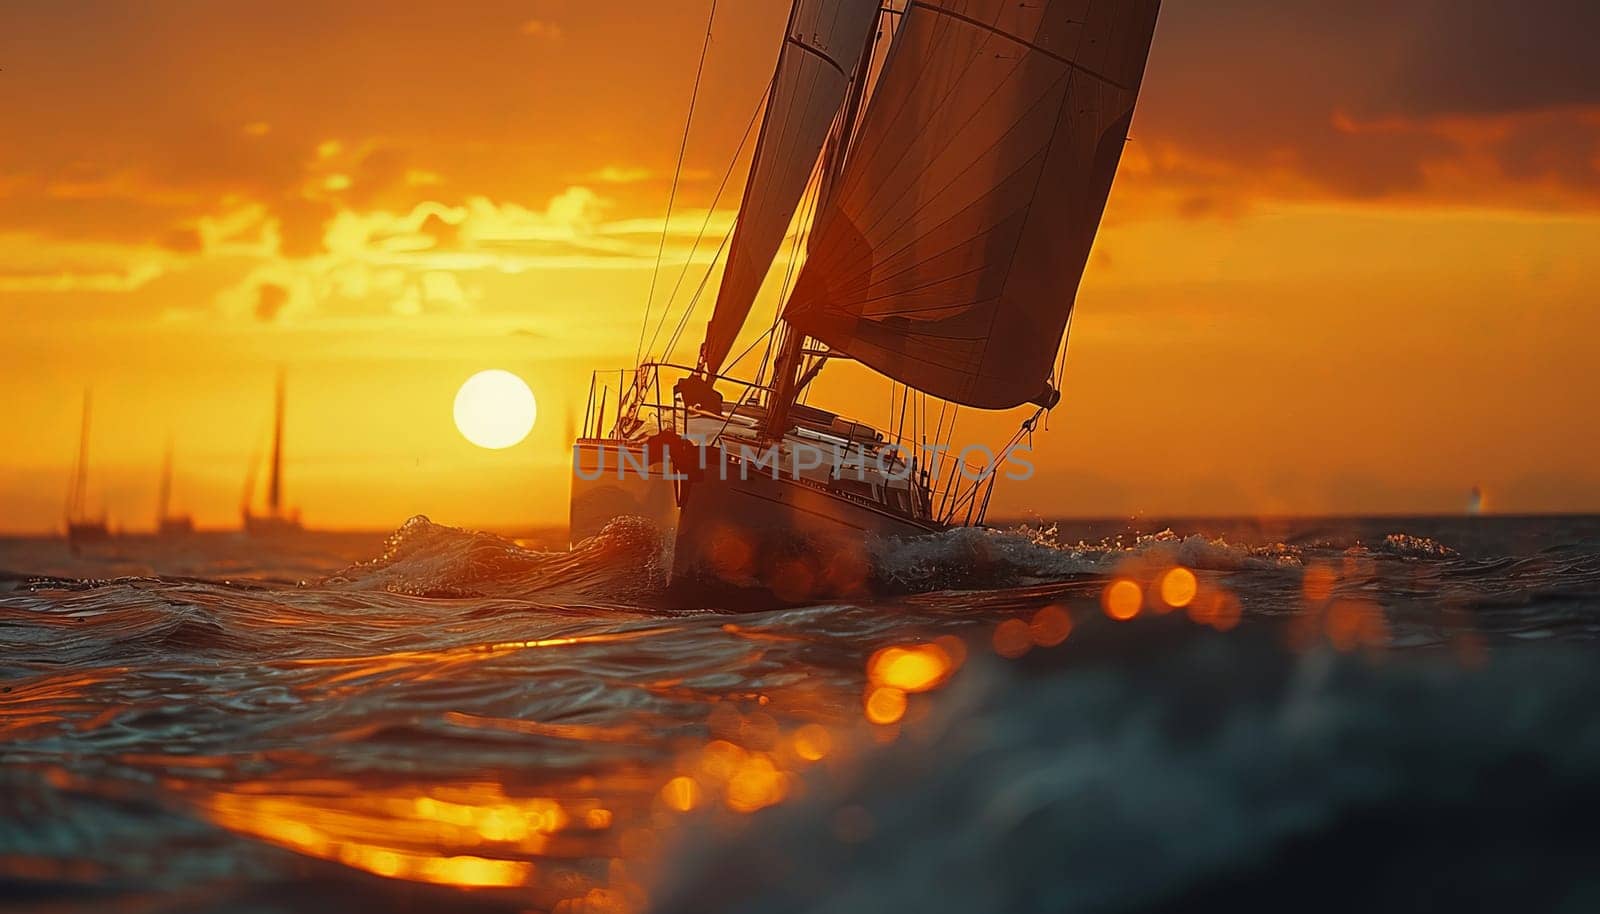 A sailboat is sailing in the ocean with the sun setting in the background. The sky is orange and the water is calm